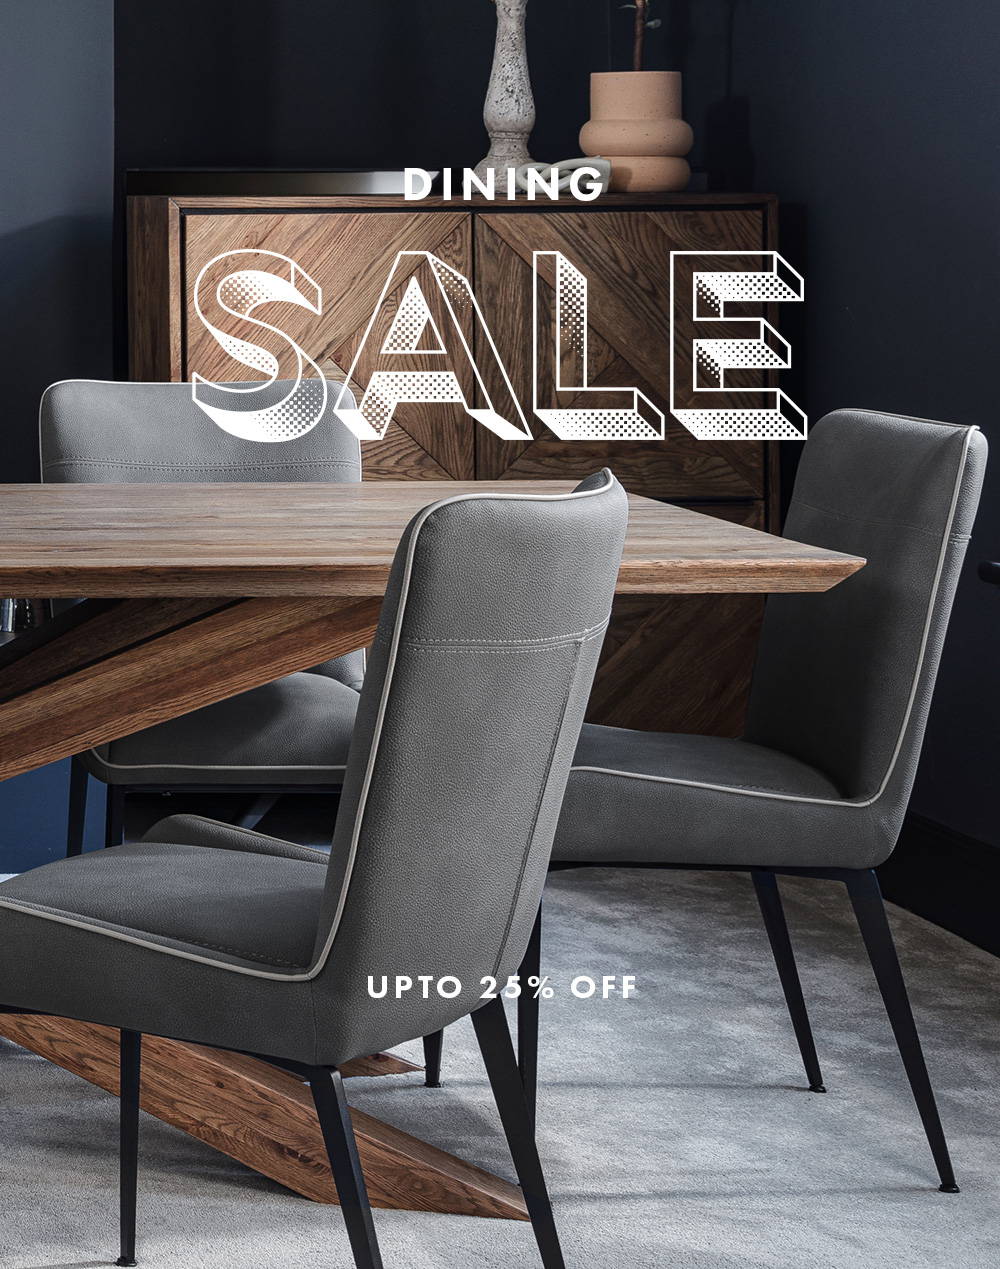 Dining Furniture On Sale In Norwich